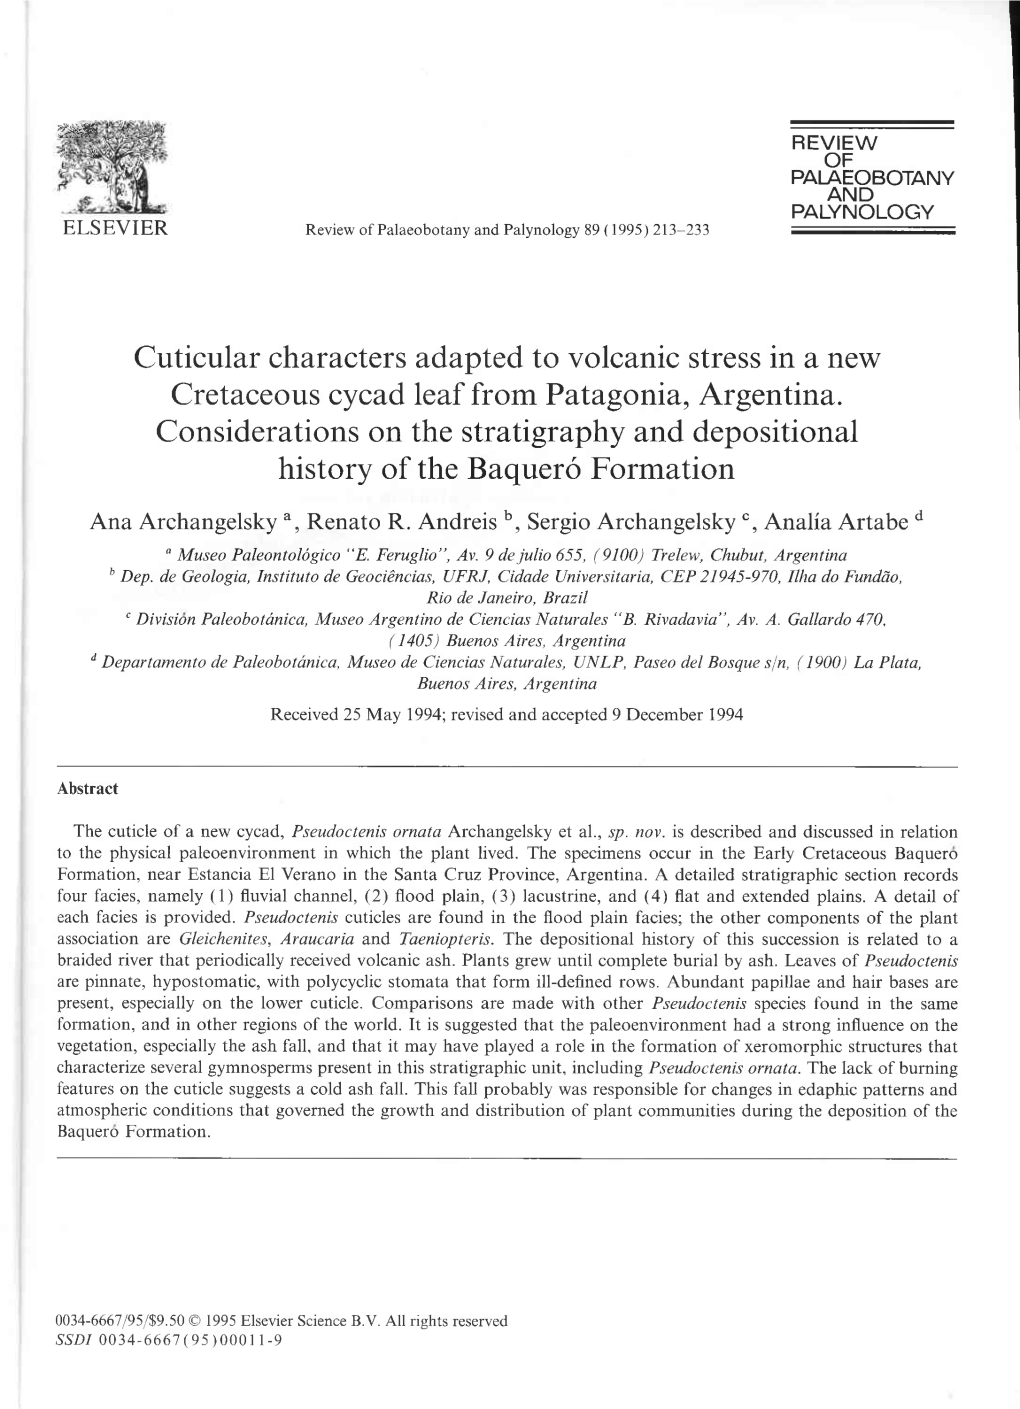 Cuticular Characters Adapted to Volcanic Stress in a New Cretaceous Cycad Leaf from Patagonia, Argentina